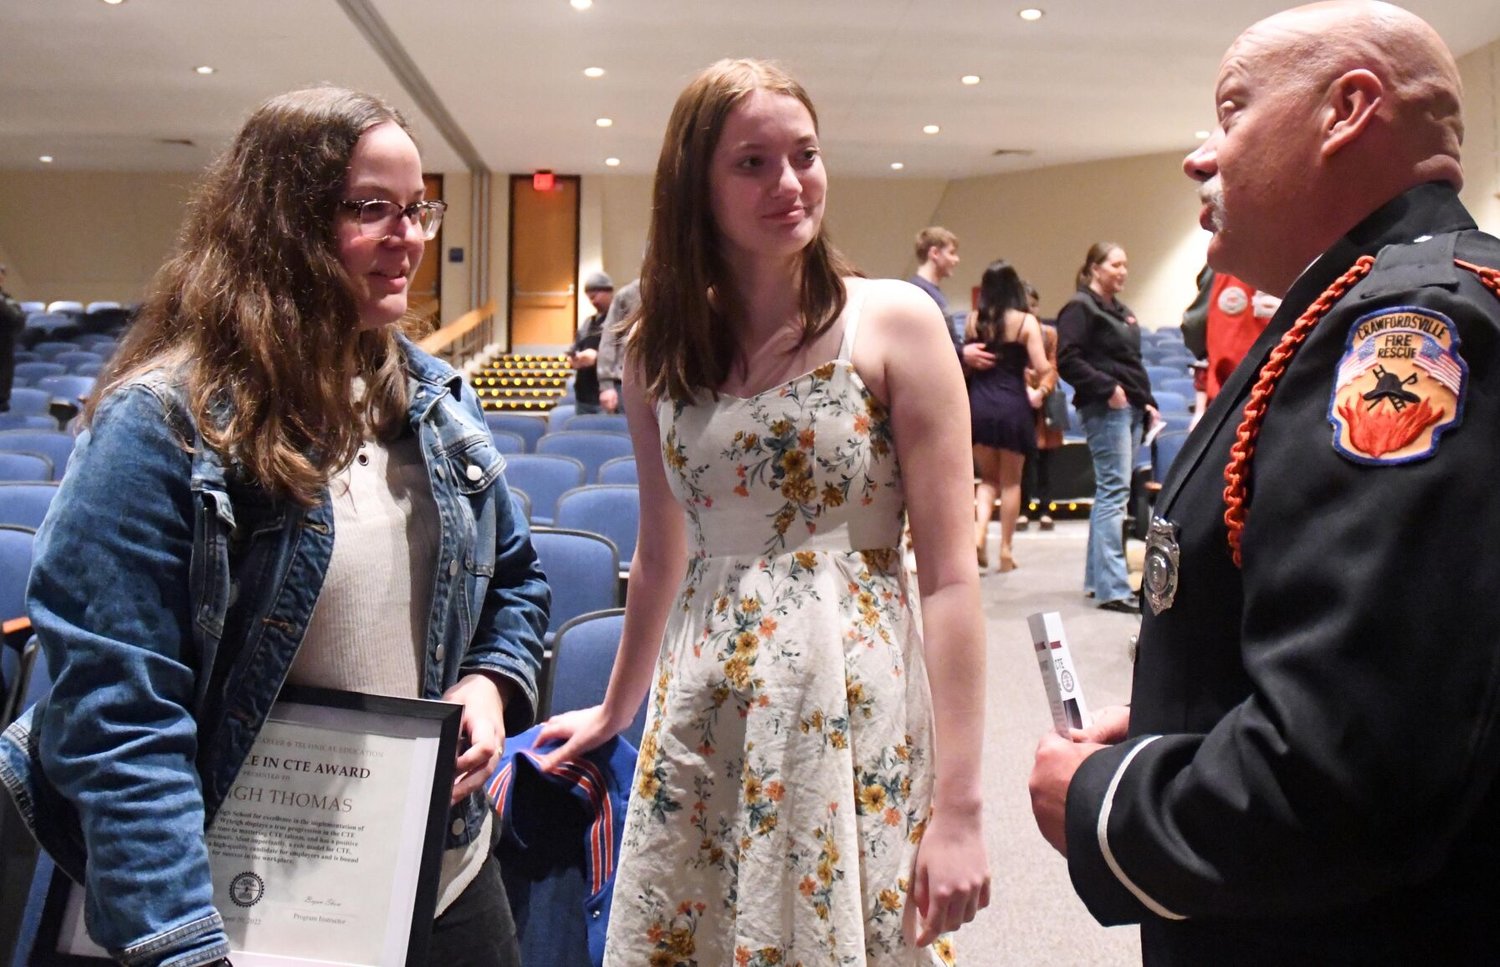 High school students Wyleigh Thomas (left) and Gracie Graham chat with Crawfordsville Fire Lt. Bryan Shaw after receiving special recognition during a West Central Indiana Career and Technical Education program Wednesday at Western Boone High School.